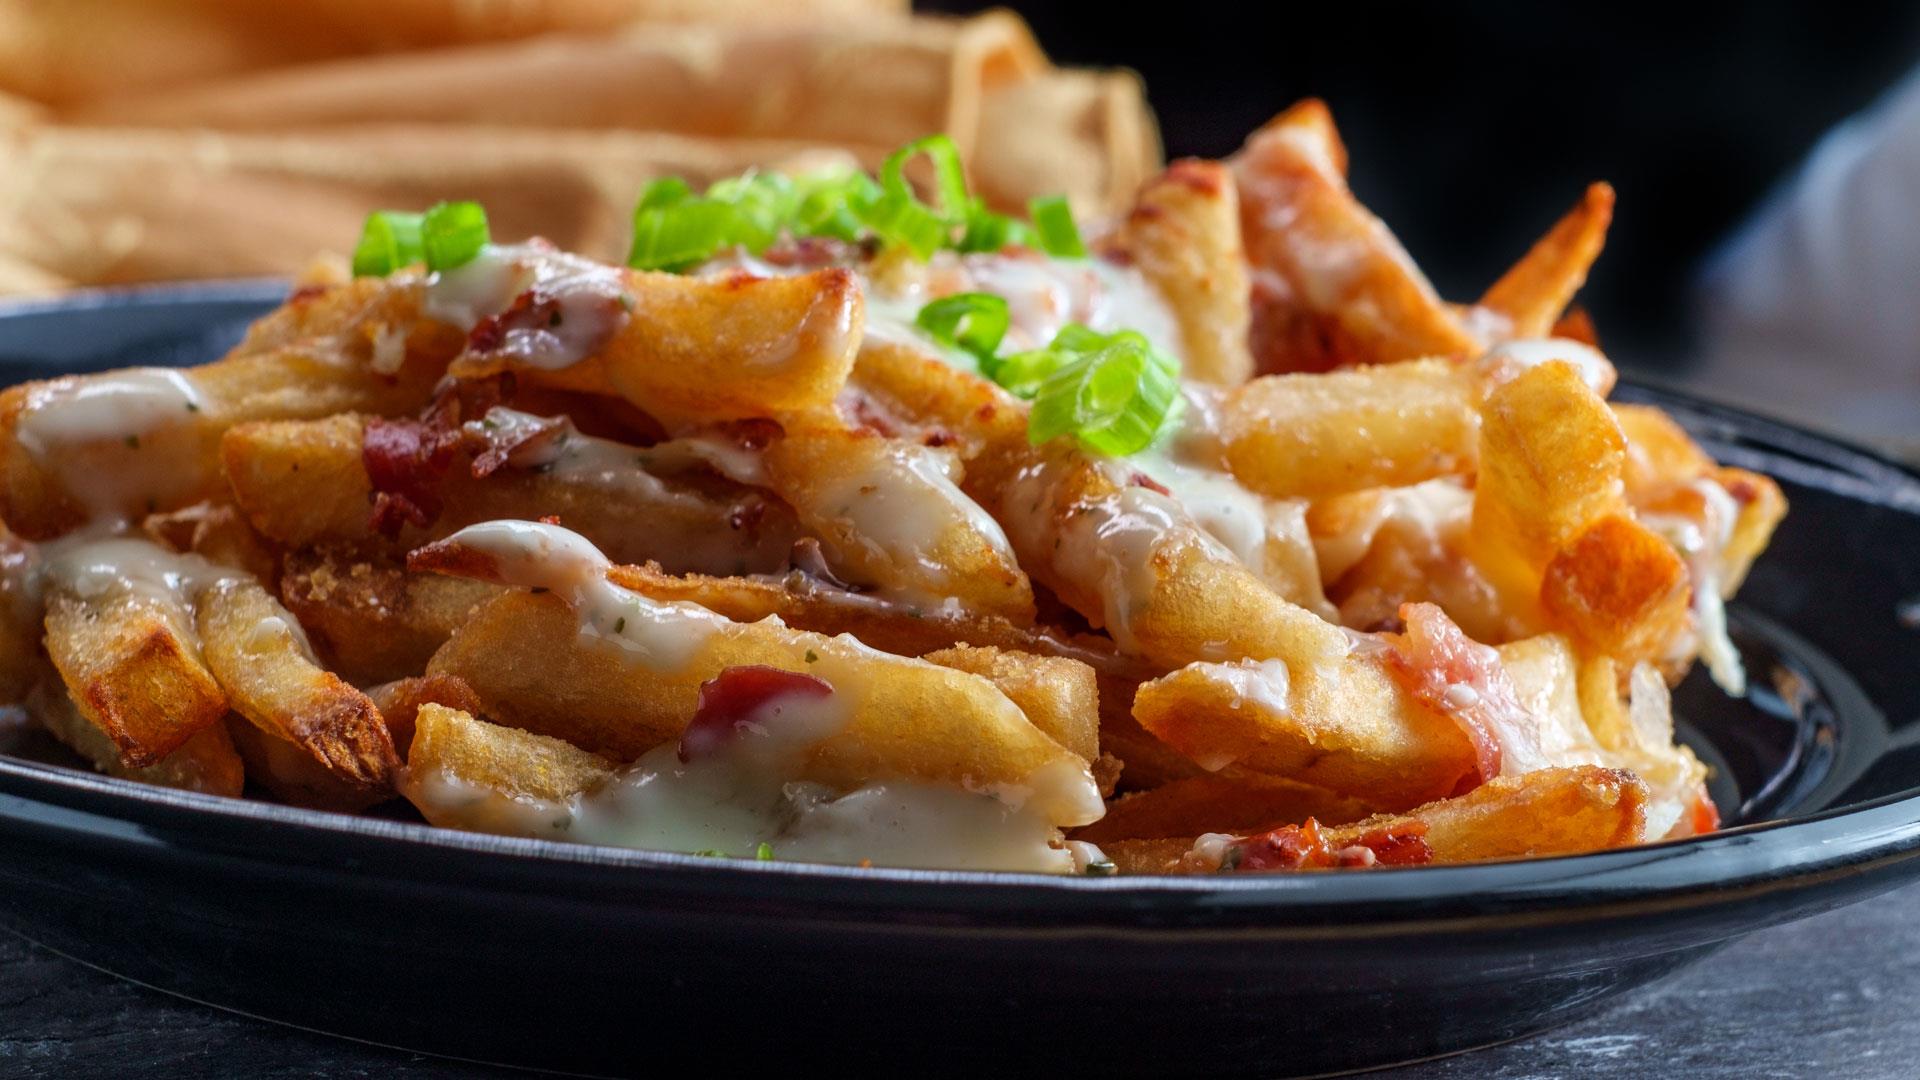 Bacon and cheese loaded fries